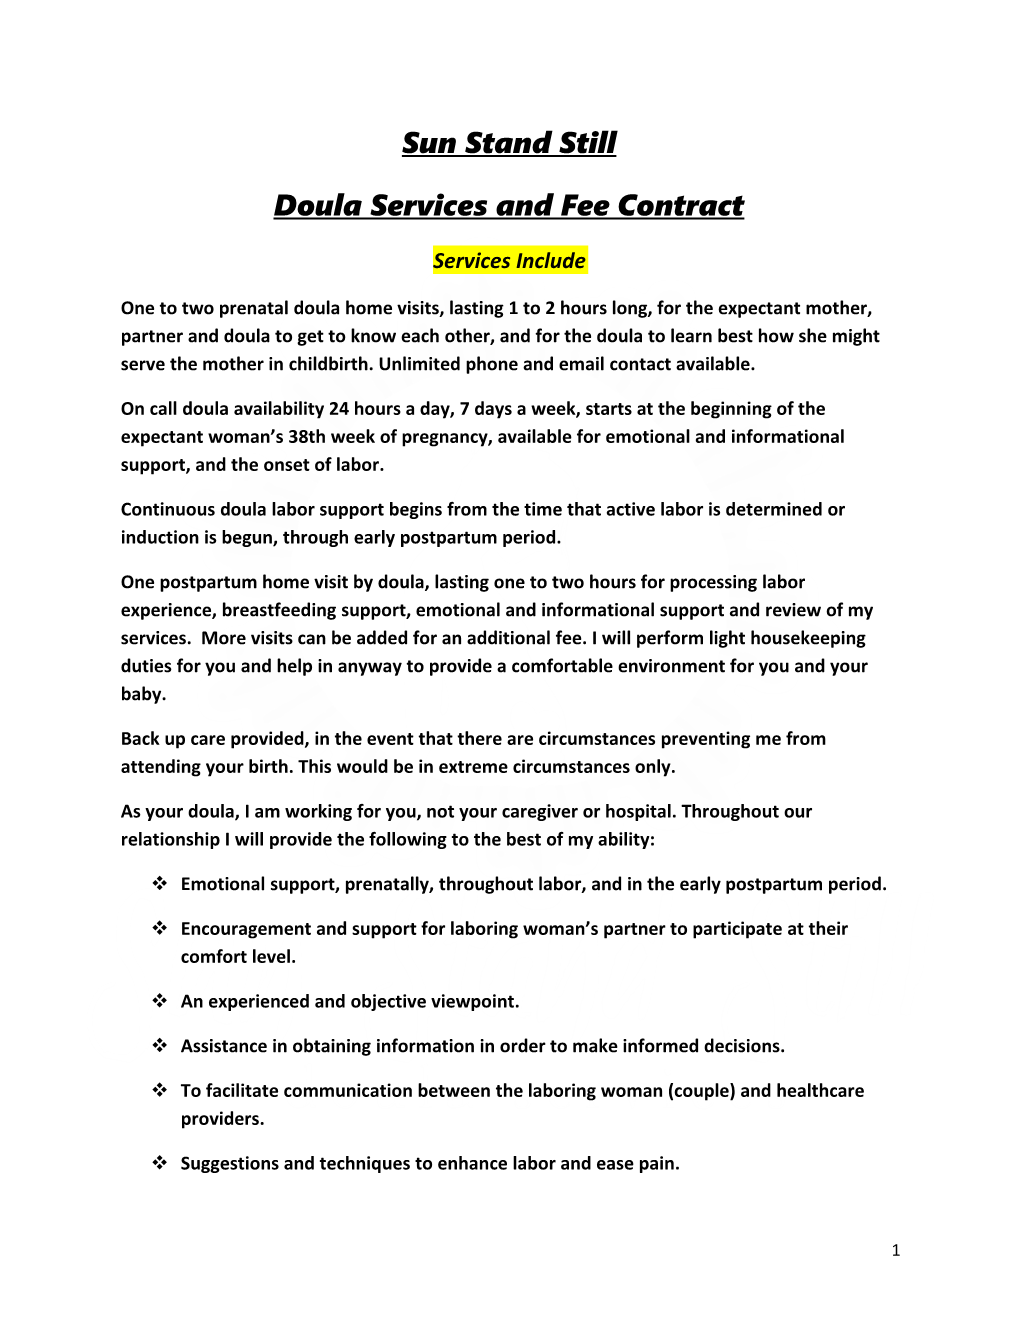 Doula Services and Fee Contract